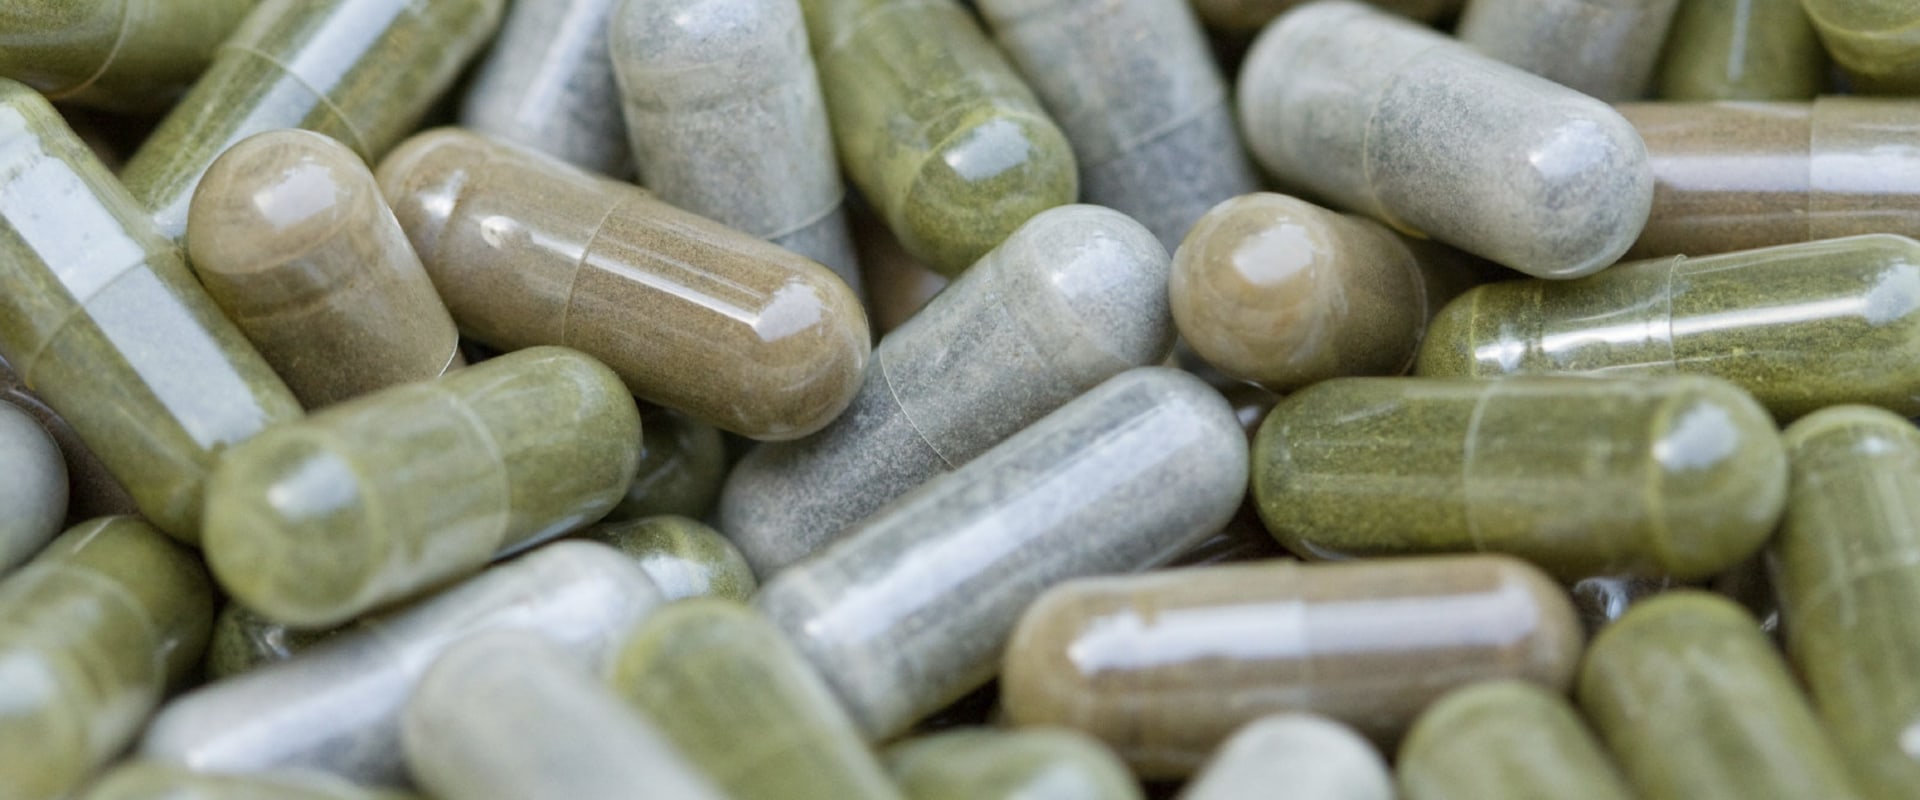 What are the Potential Side Effects of Taking Supplements?